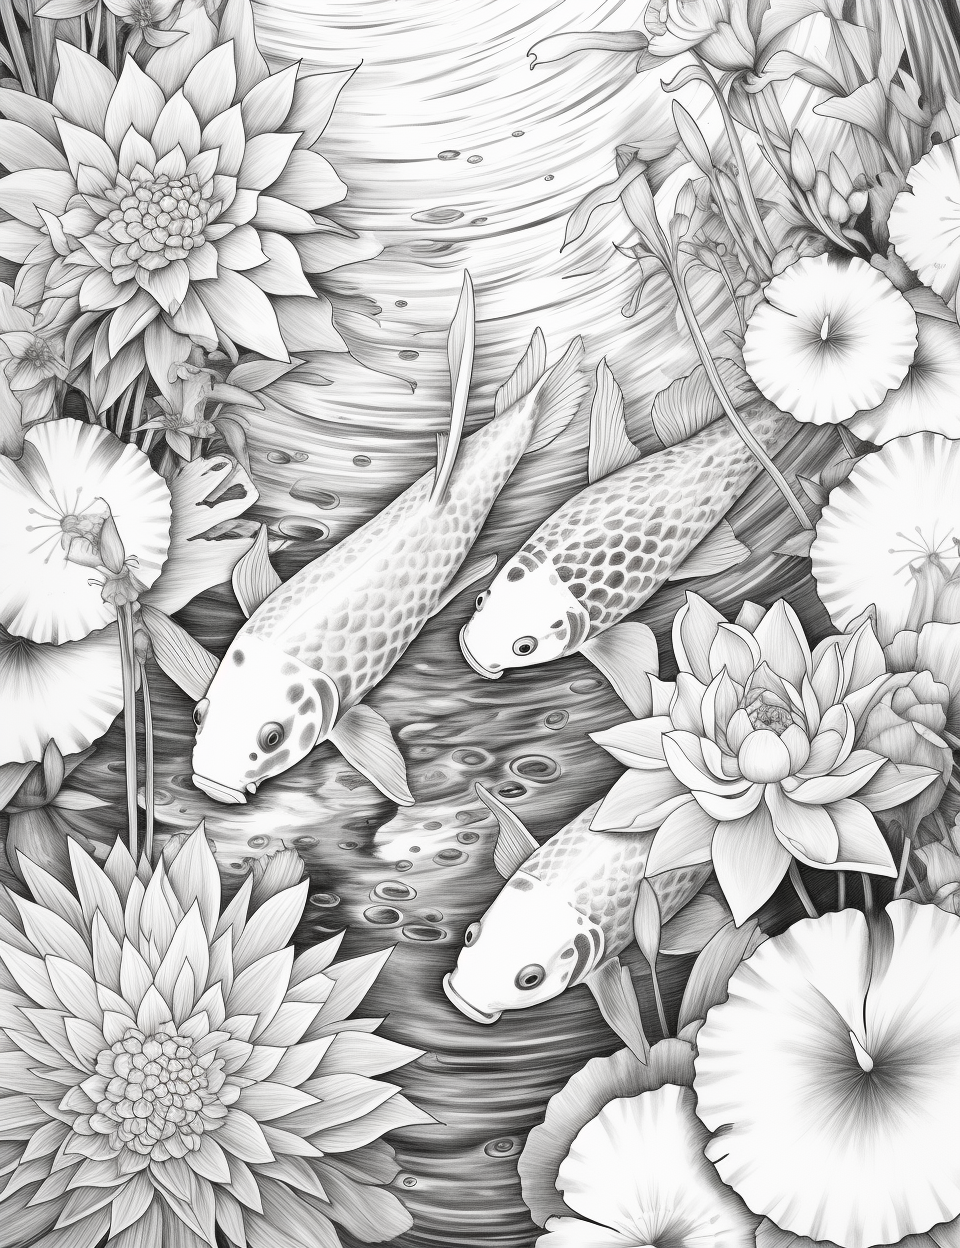 adult coloring pages, adult coloring sheets, adult coloring book pdf, adult coloring book printable, spring coloring pages for adults, summer coloring pages for adults, autumn coloring pages for adults, koi pond coloring pages, fish coloring pages, animal coloring pages for adults, animal coloring book pdf